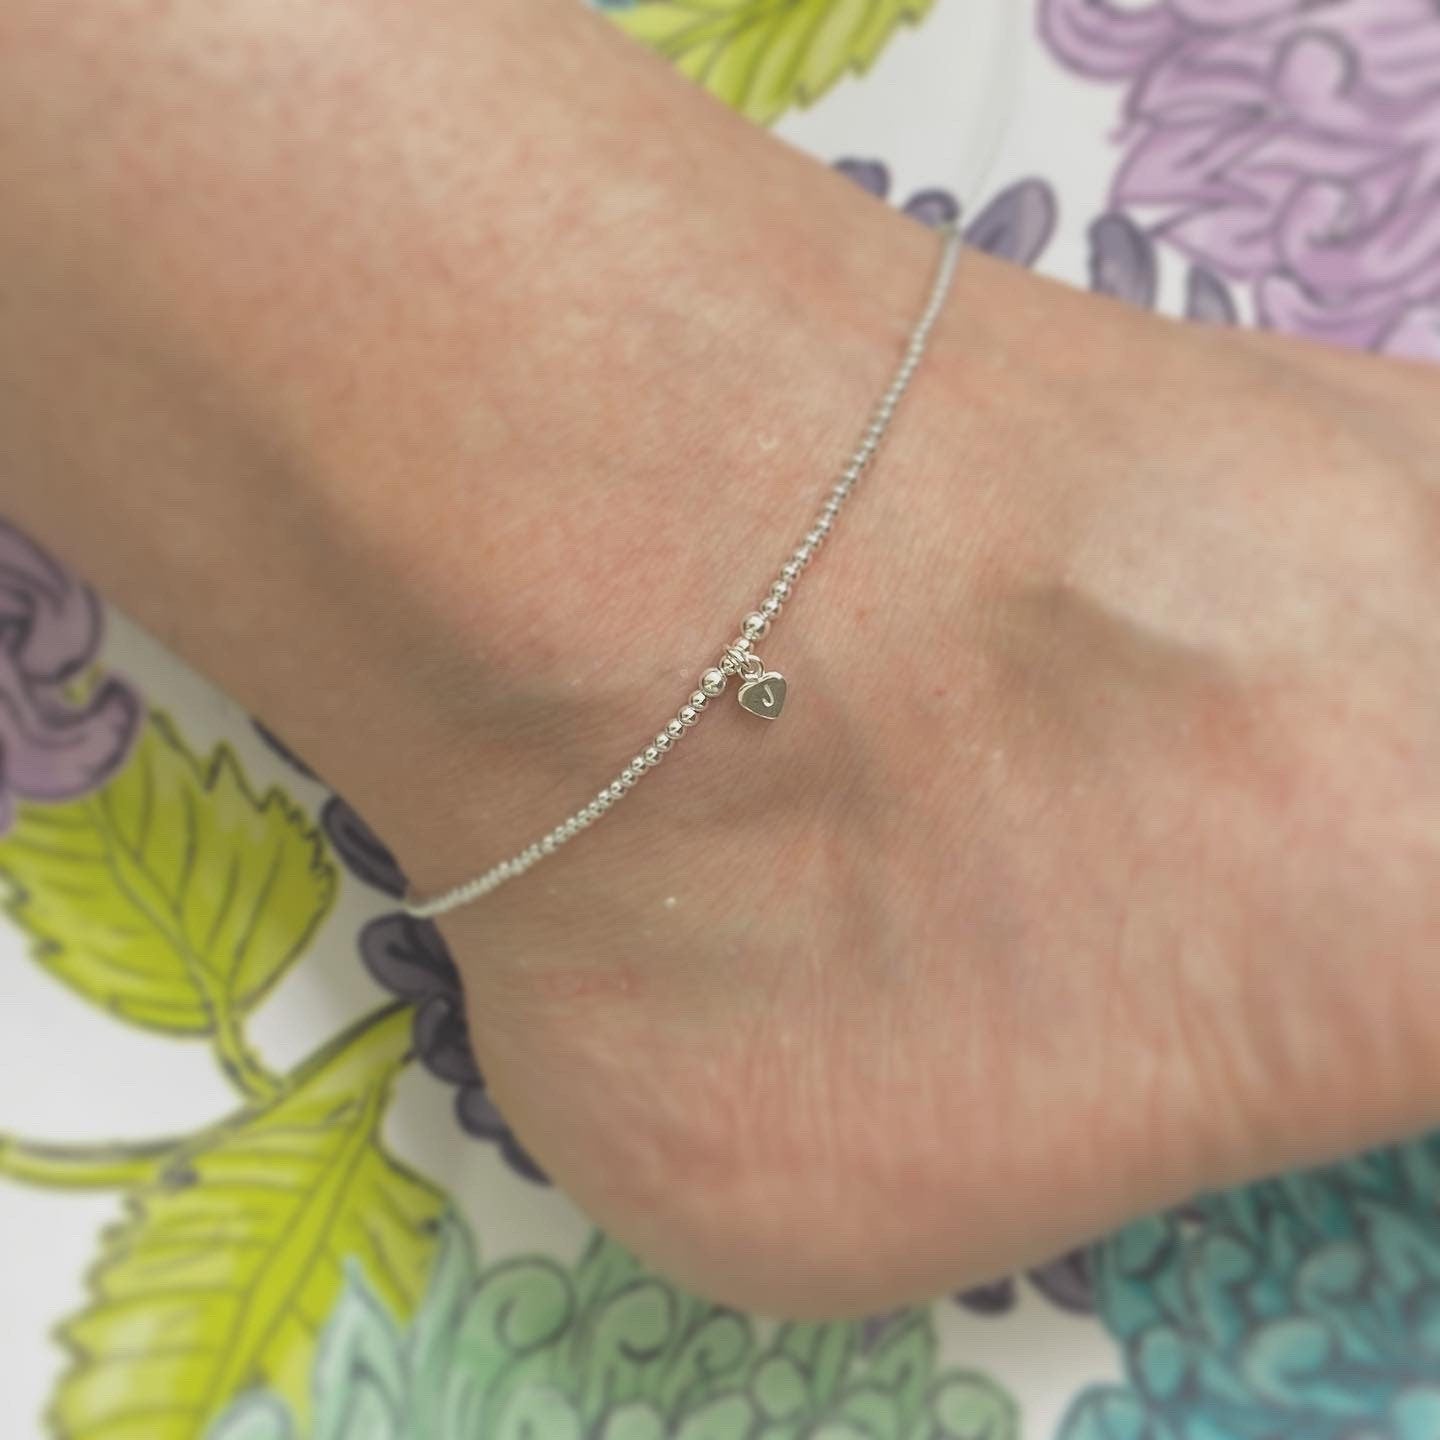 Personalised Anklet Sterling Silver Heart Initial Ankle Bracelet, Anklets for women